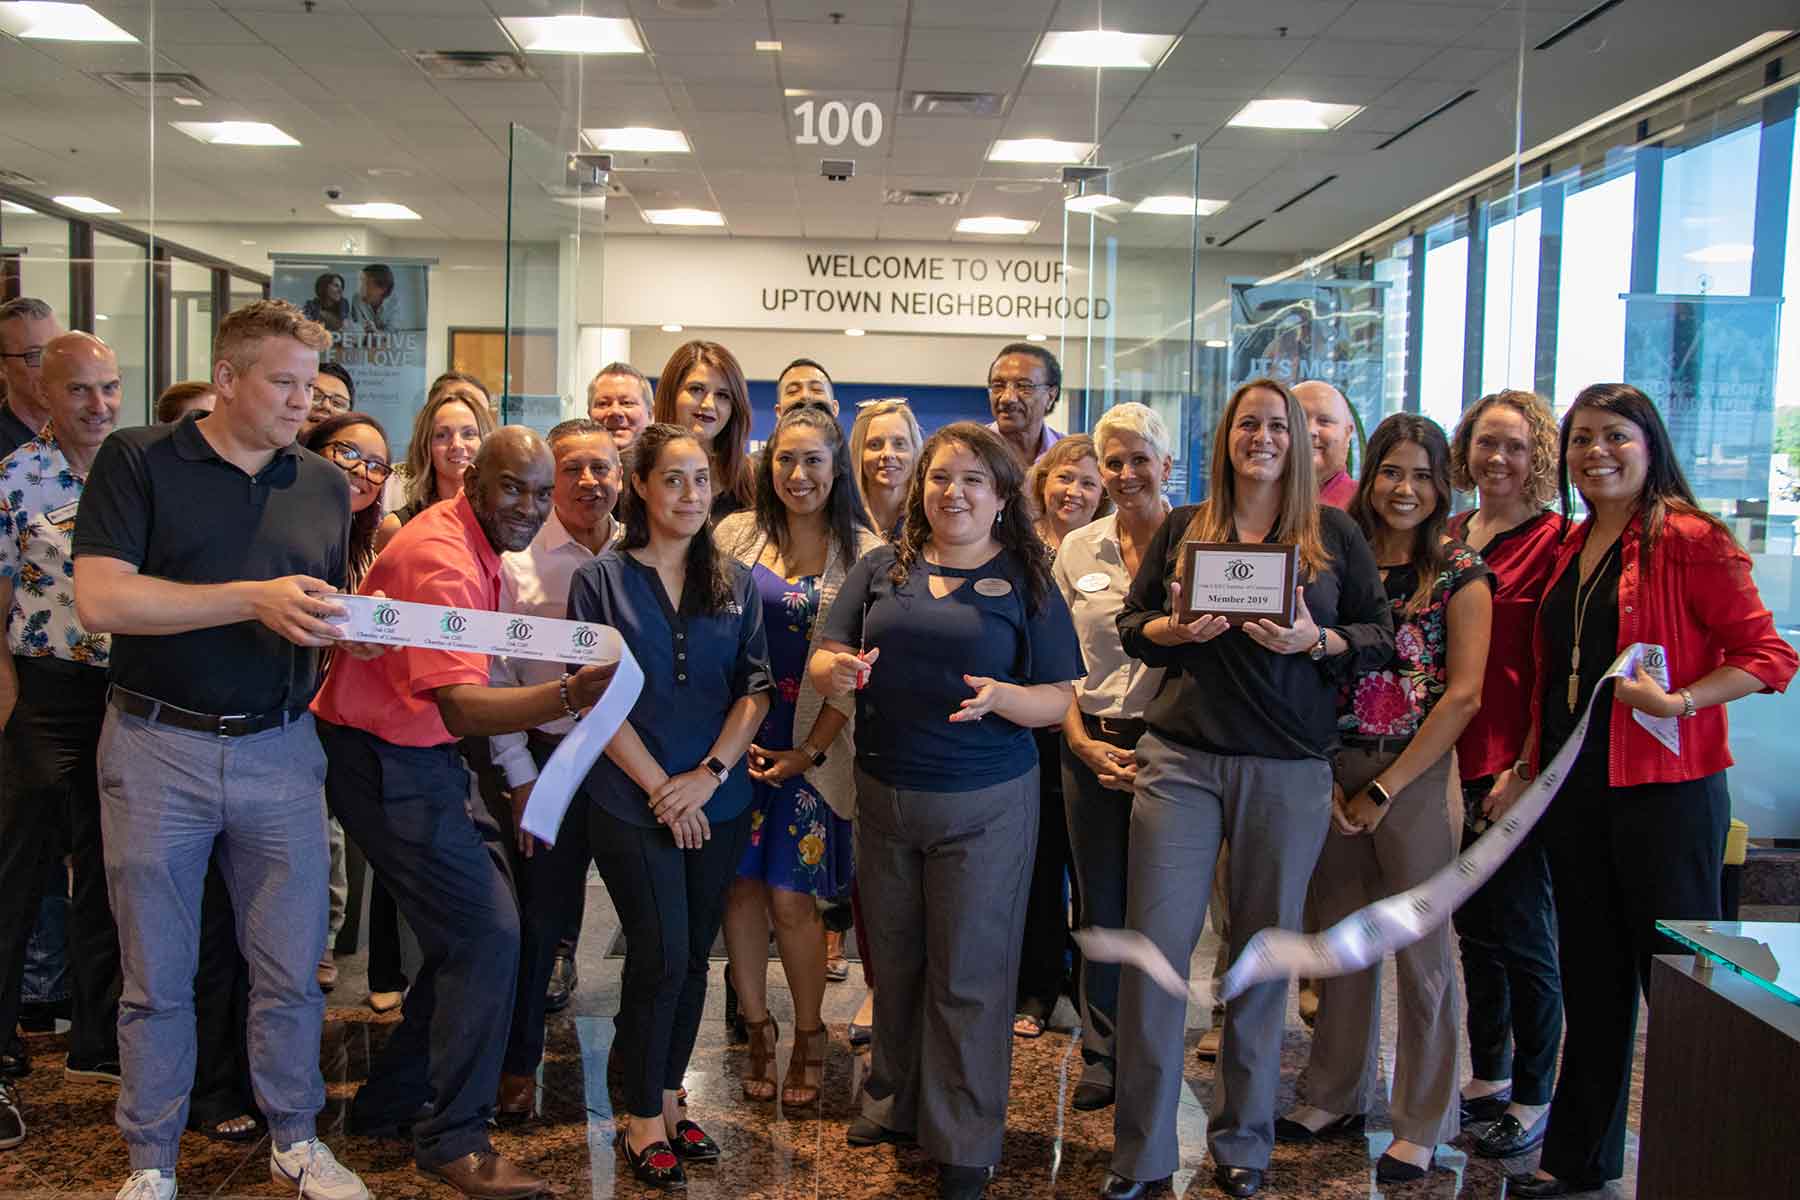 Group of Neighborhood Credit Union Employees standing behind ribbon, smiling and laughing